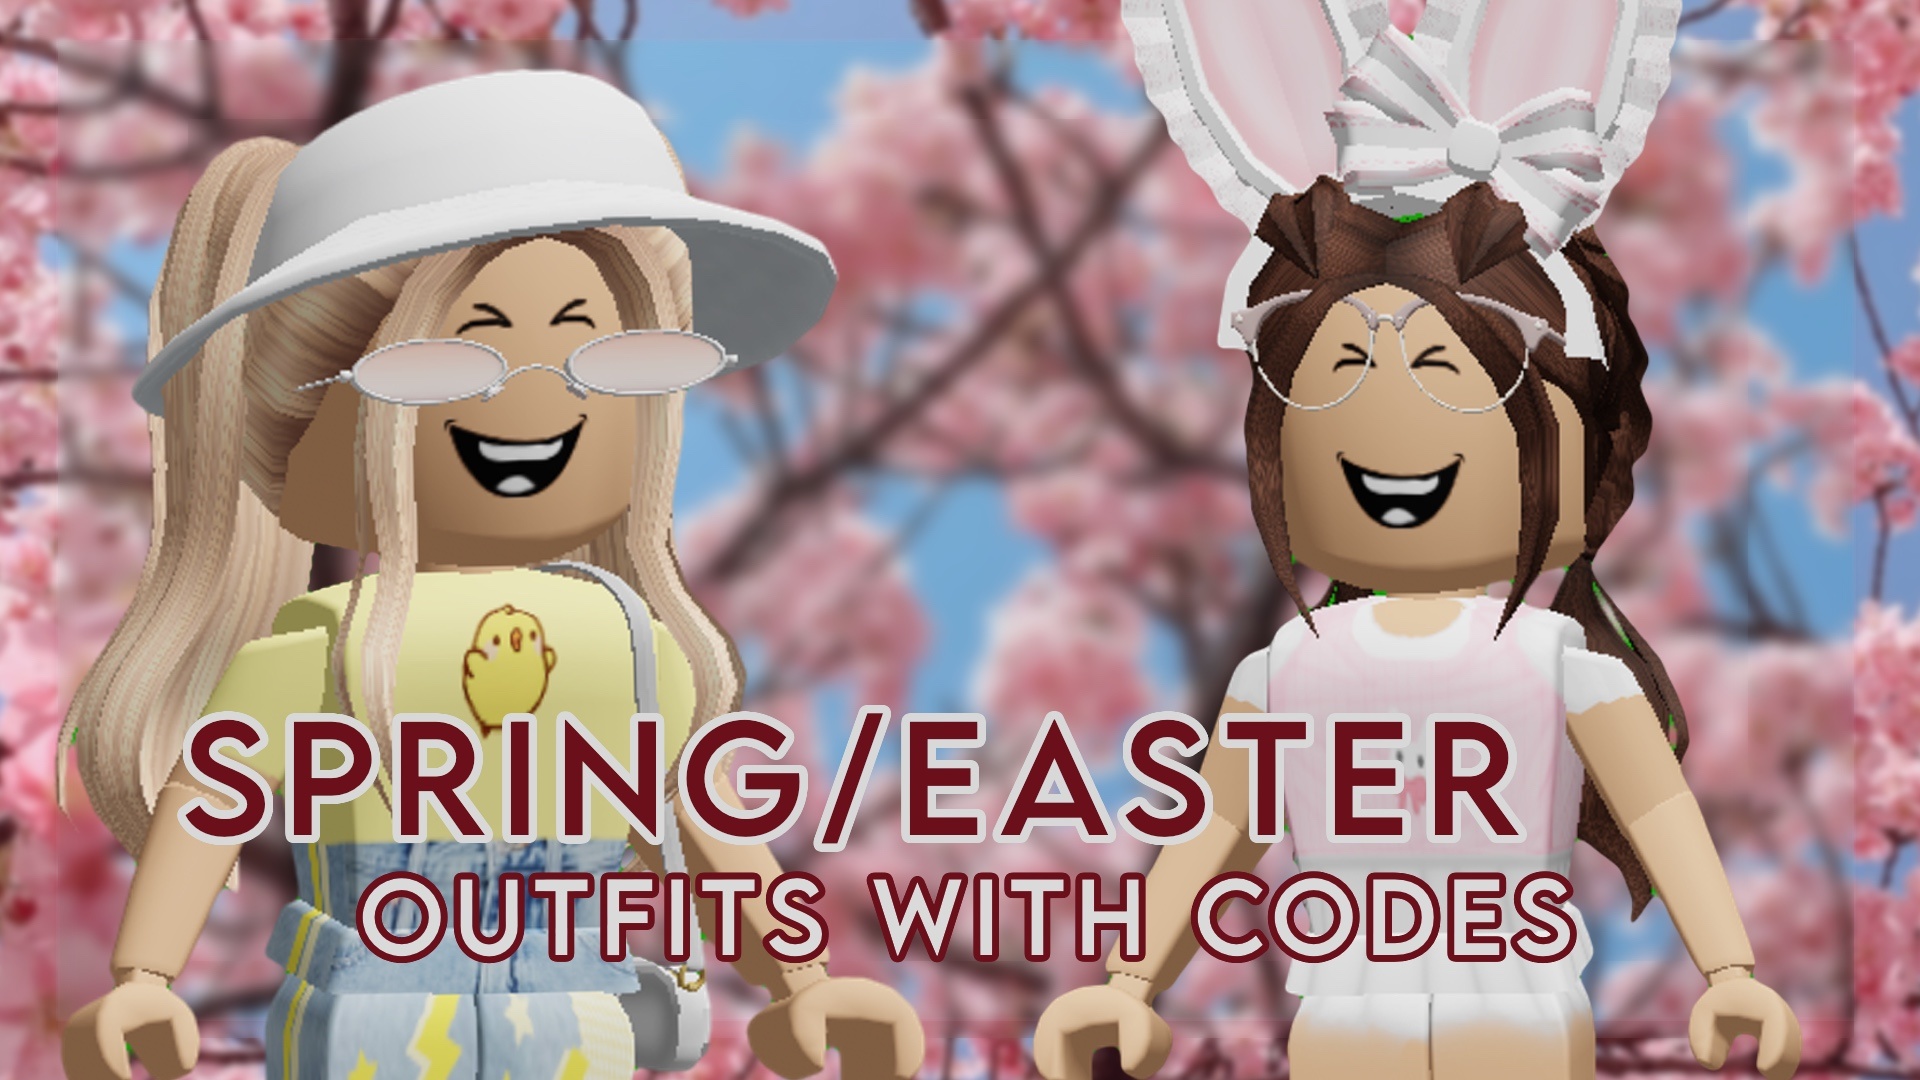 Cute Easter Spring Aesthetic Roblox Outfit Codes Gfx - laughing fun roblox face